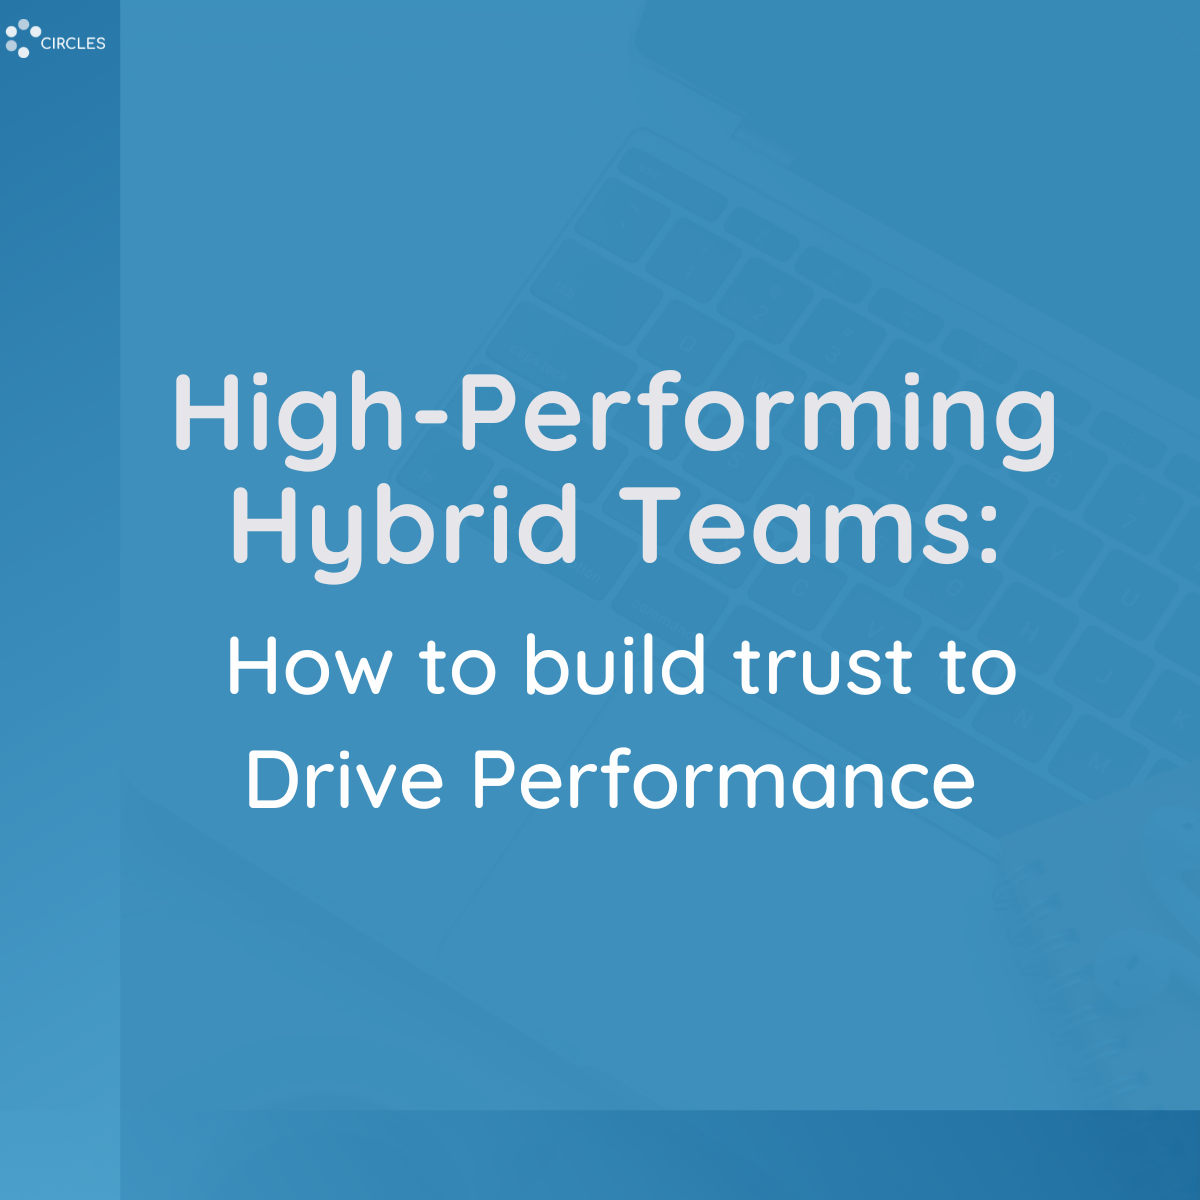 High-Performing Hybrid Teams: How to build trust to Drive Performance